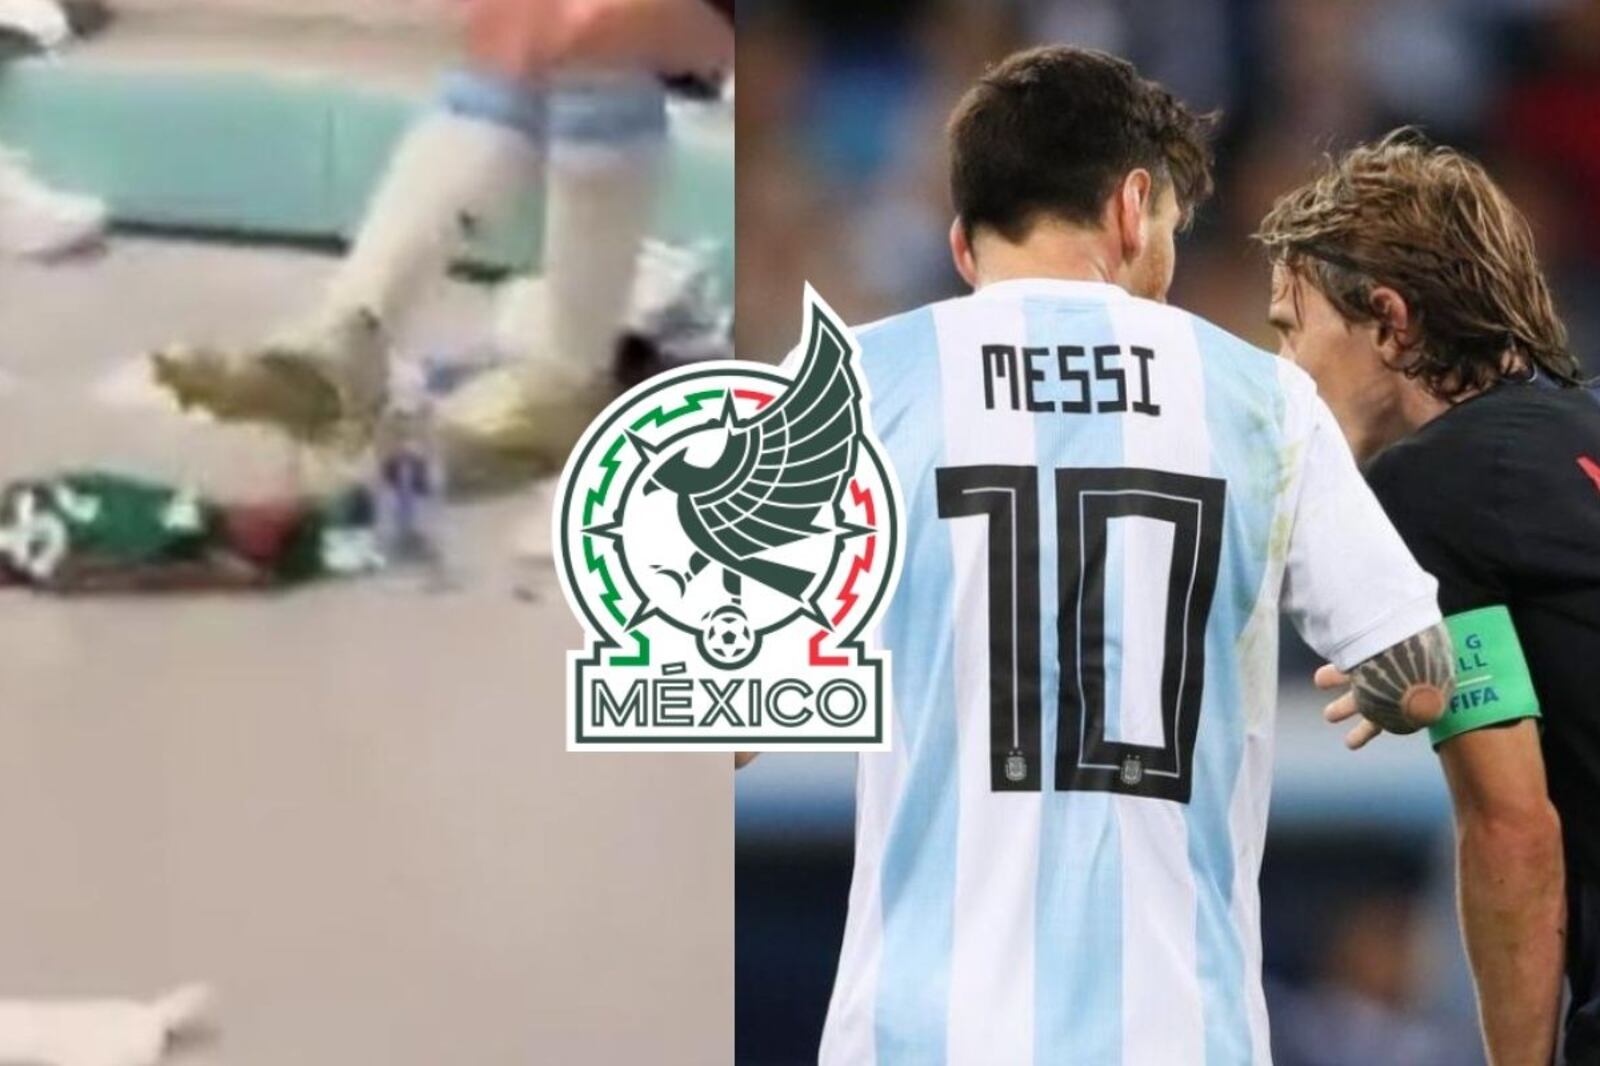 While Messi stepped on the shirt of El Tri, what Enzo Fernandez did with the shirt of Croatia